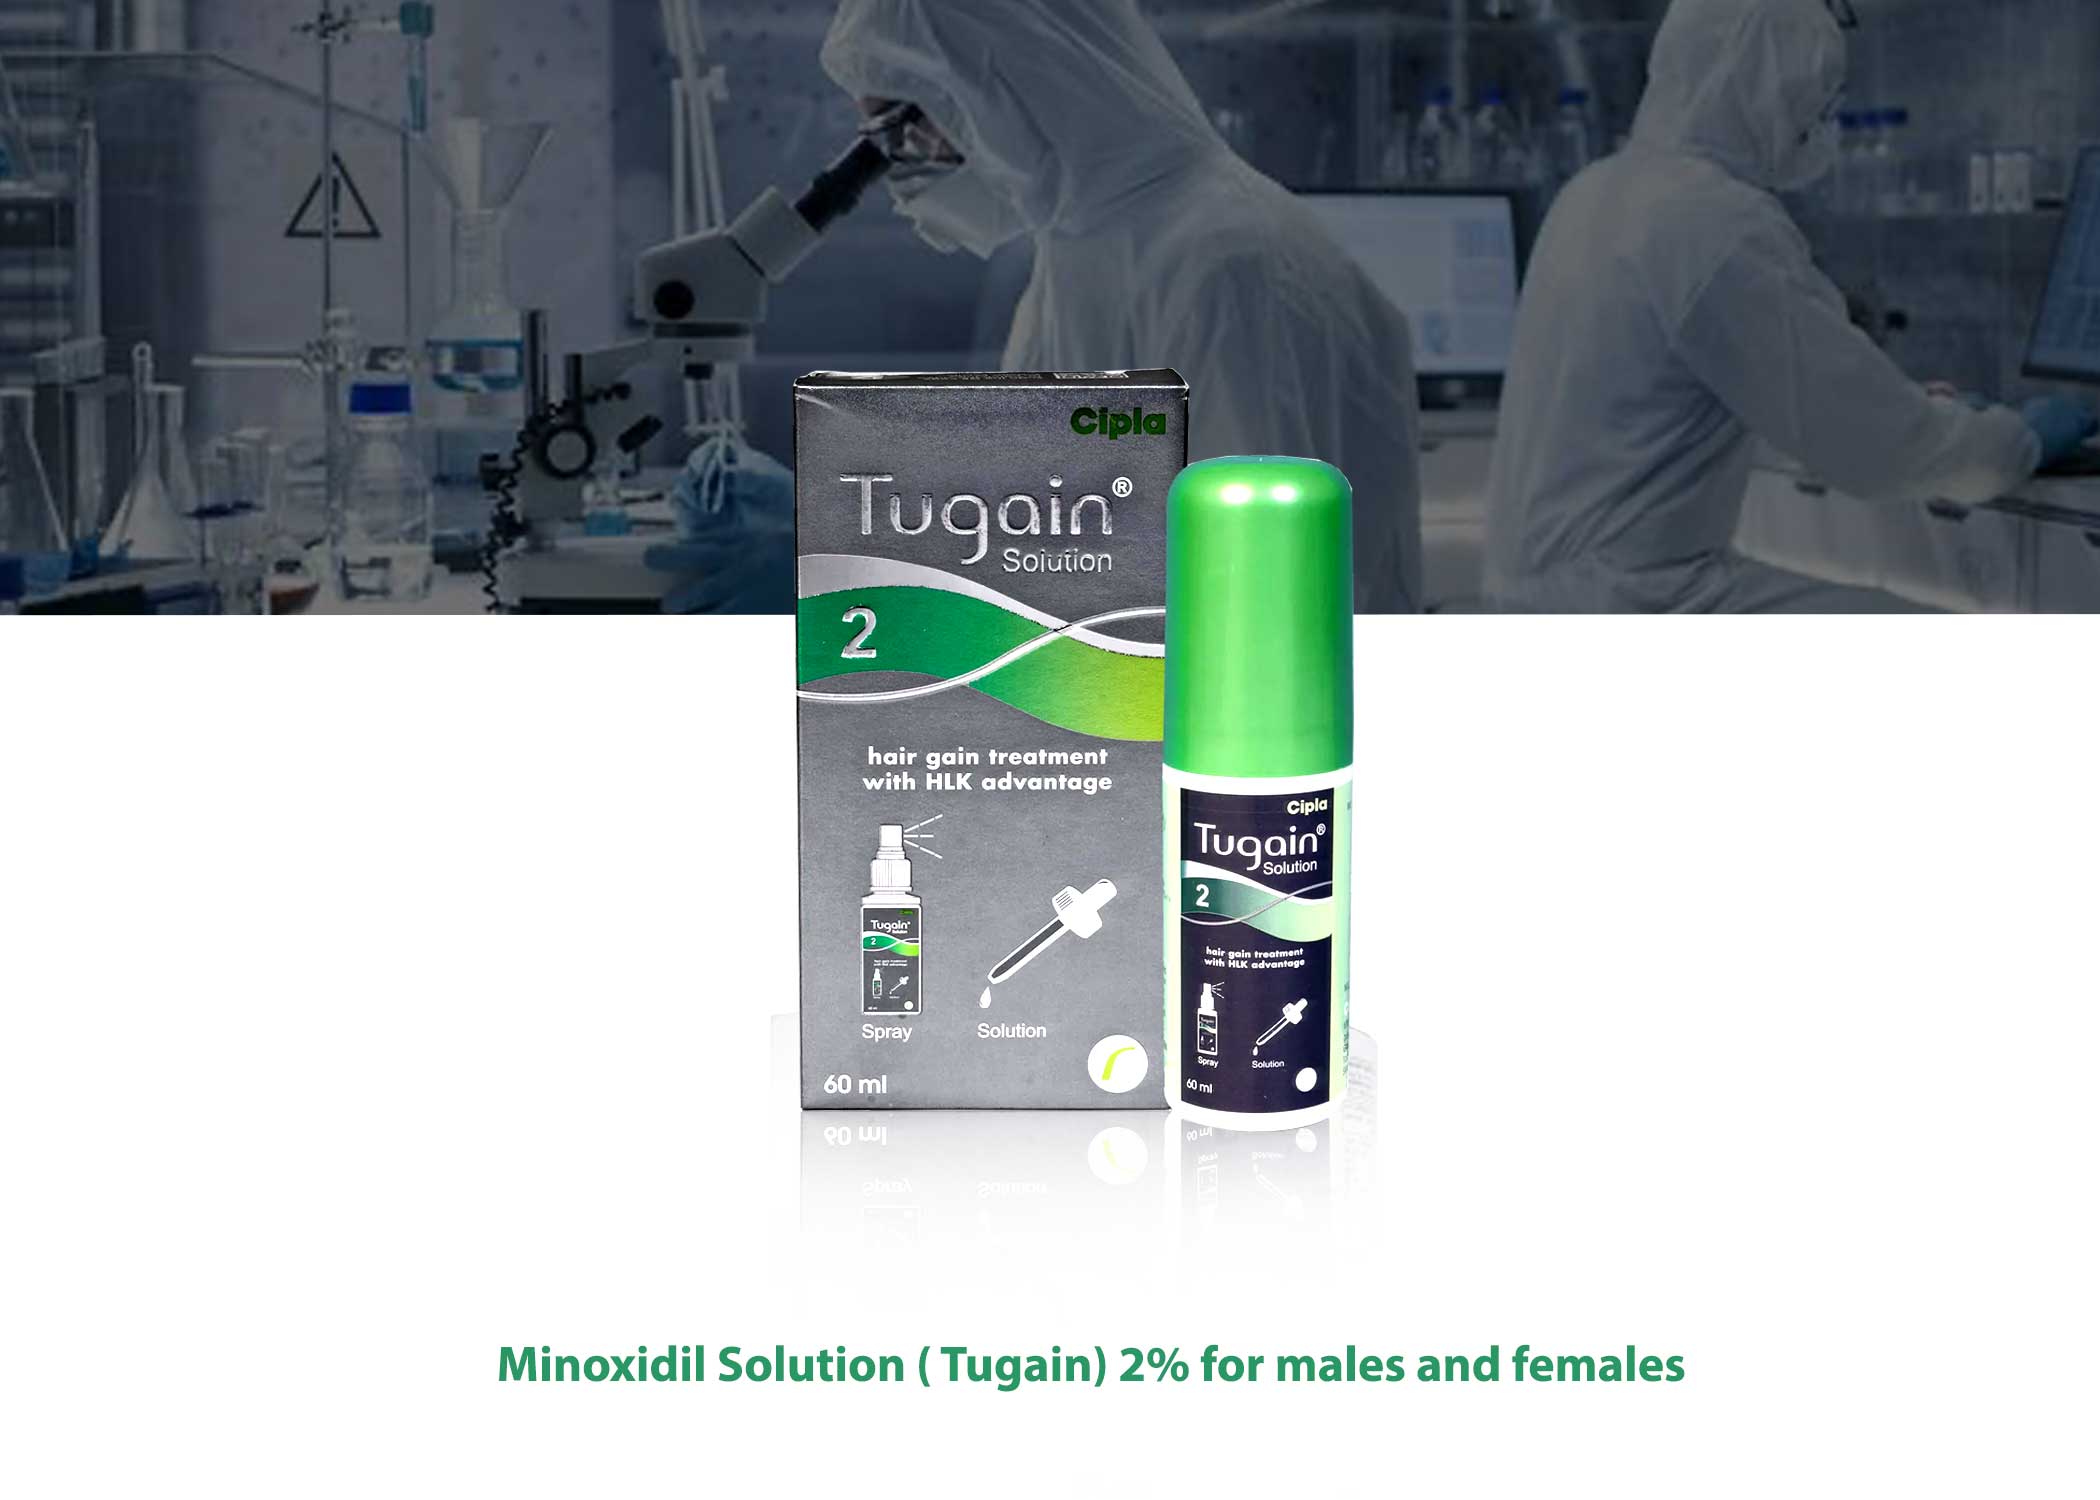 Minoxidil Solution Tugain 2 for males and females